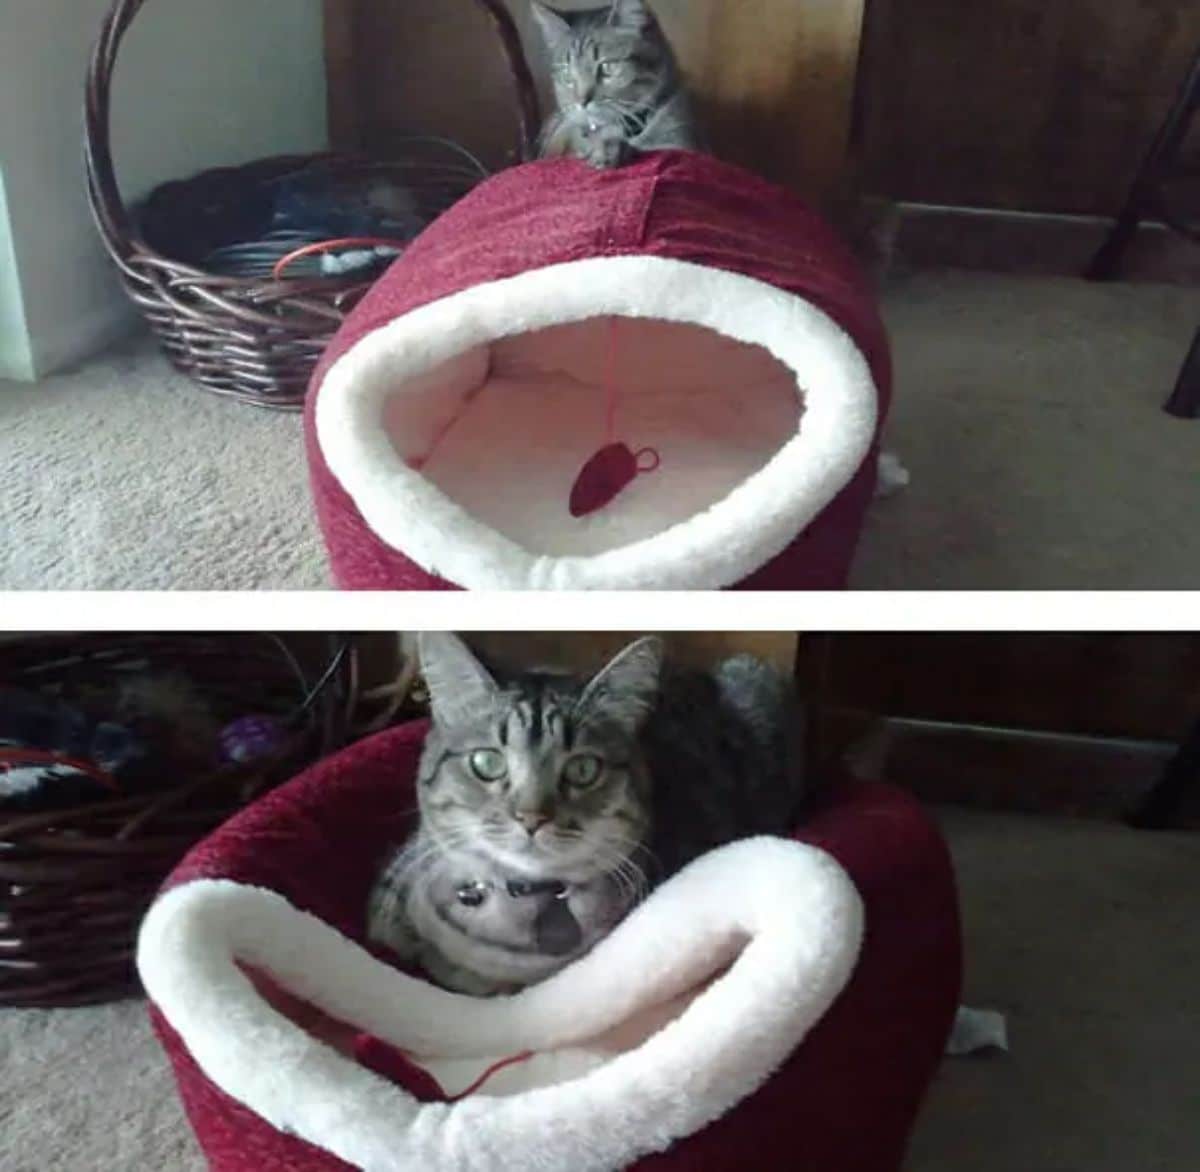 2 photos of a grey cat with a red and white closed cat bed with the cat laying on top of it in the second photo